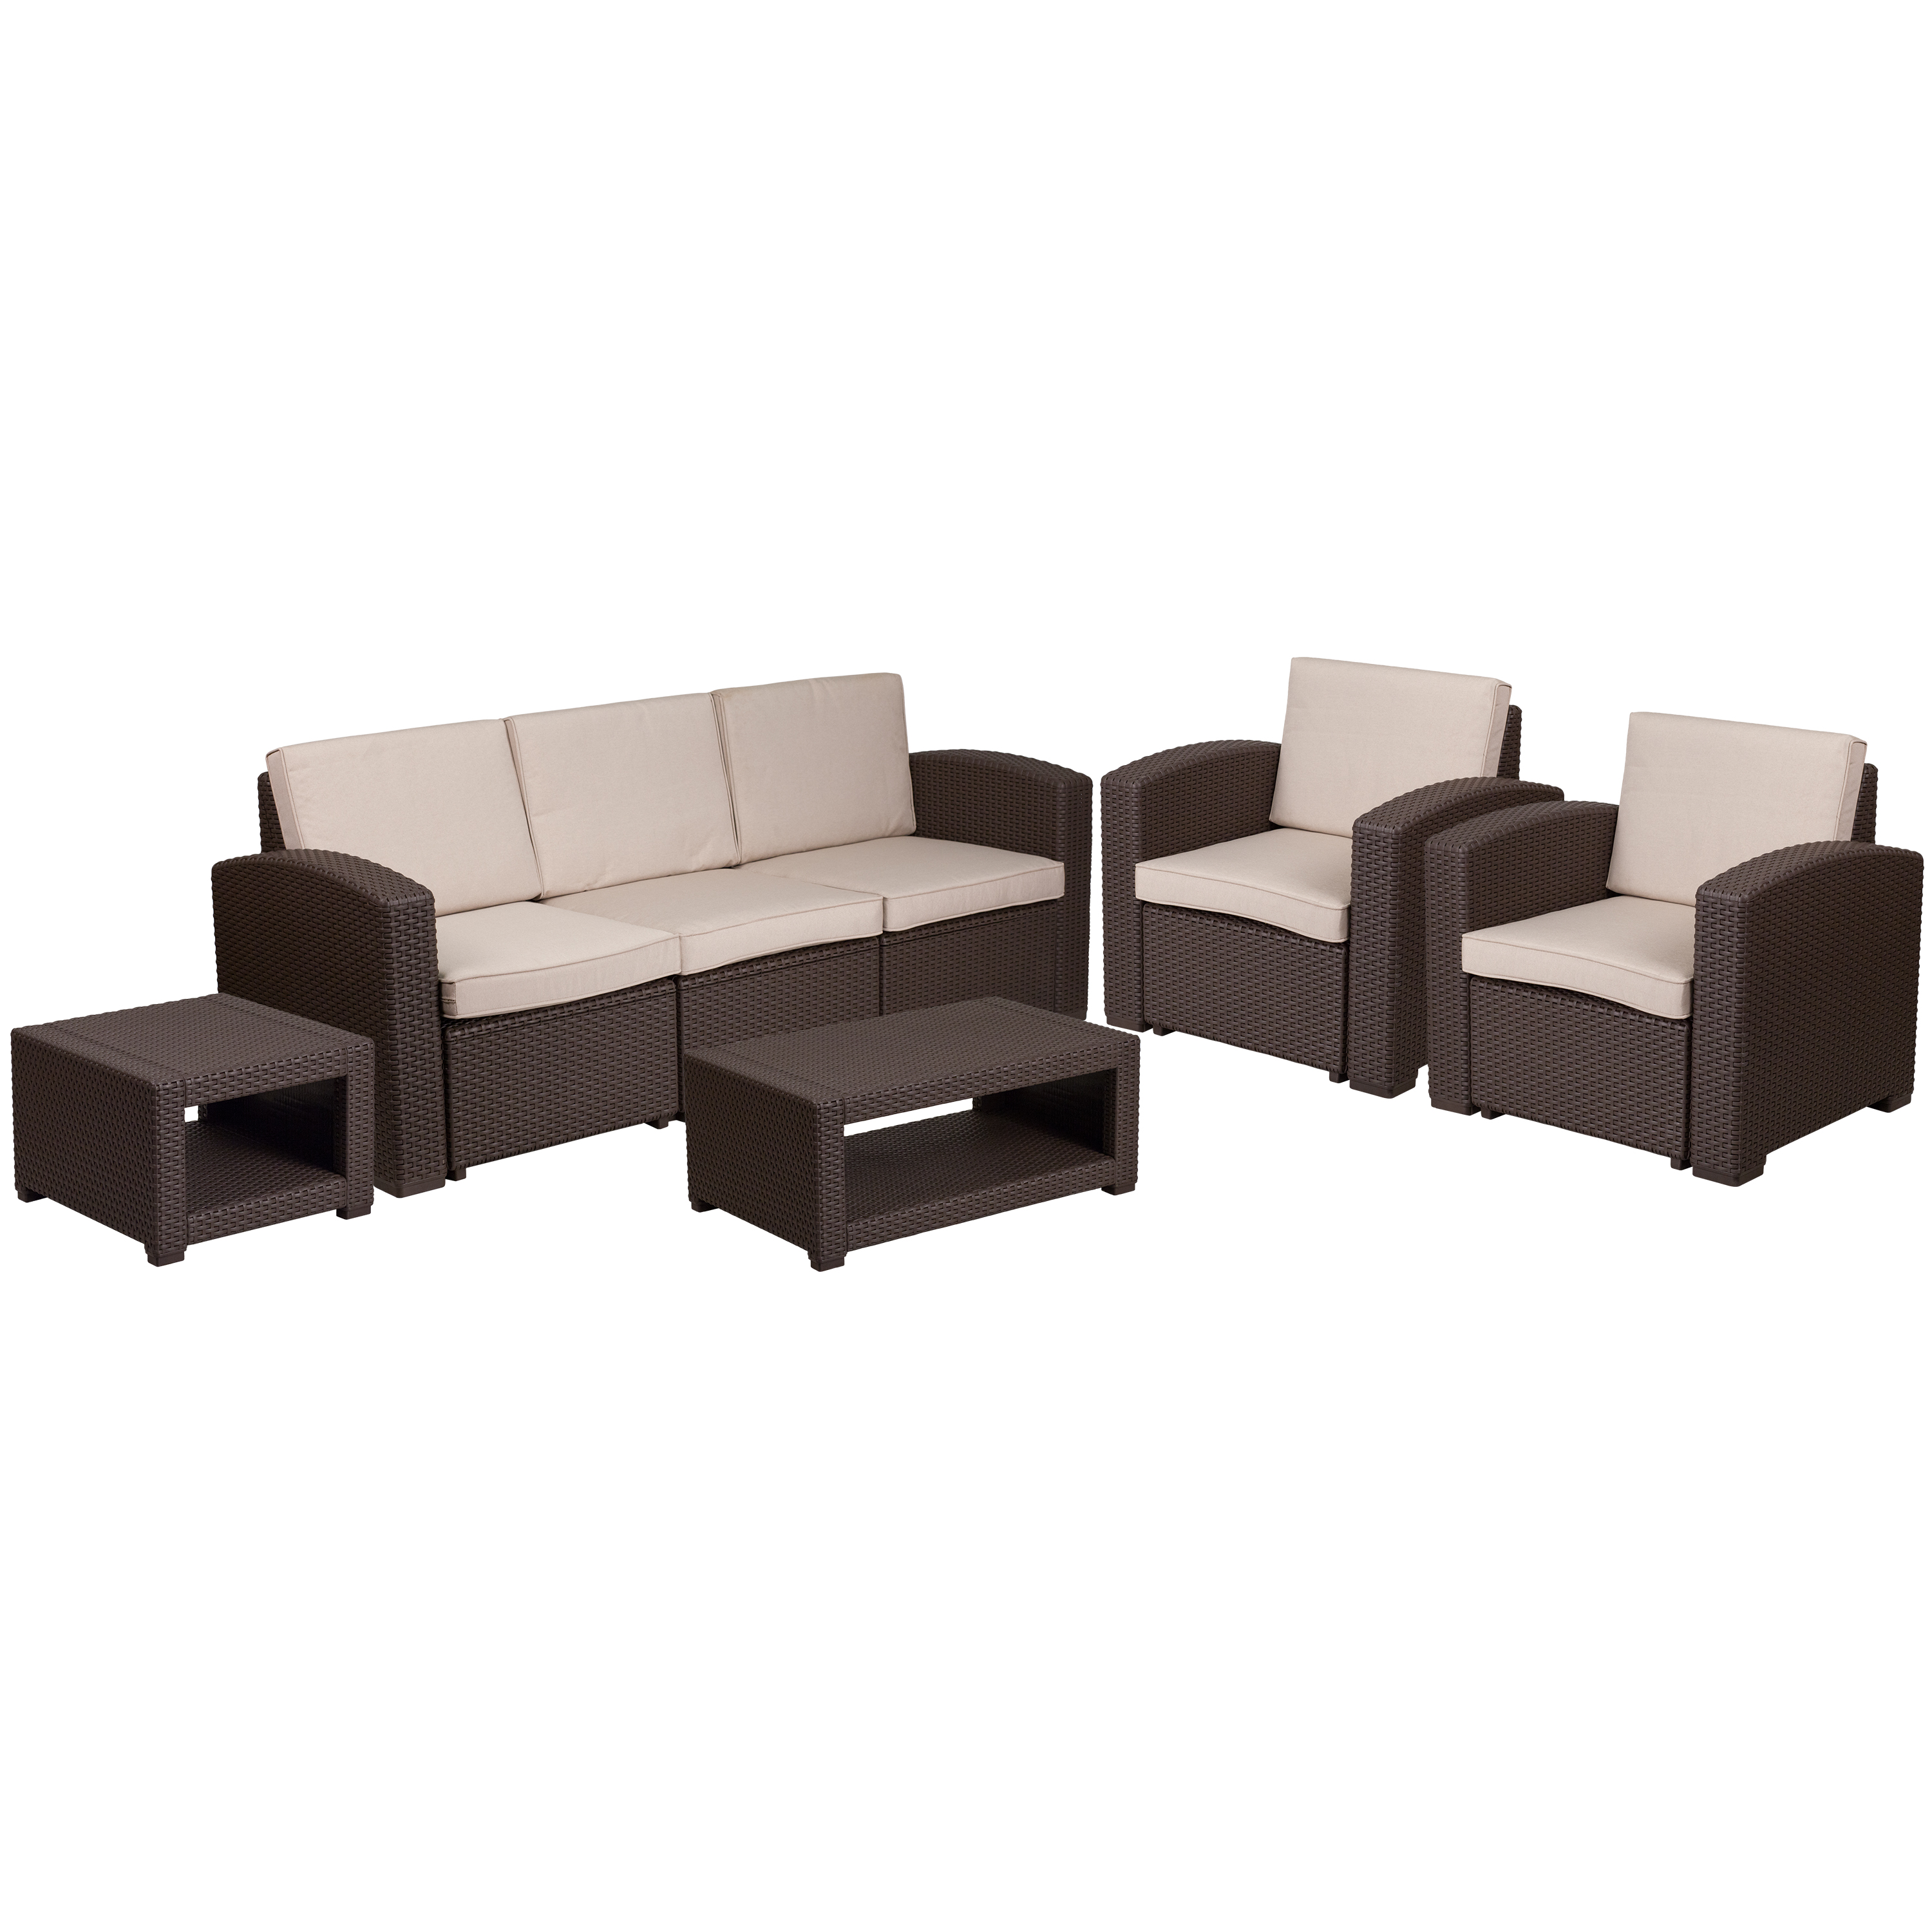 Flash Furniture 5 Piece Outdoor Faux Rattan Chair, Sofa and Table Set in Chocolate Brown - image 2 of 2